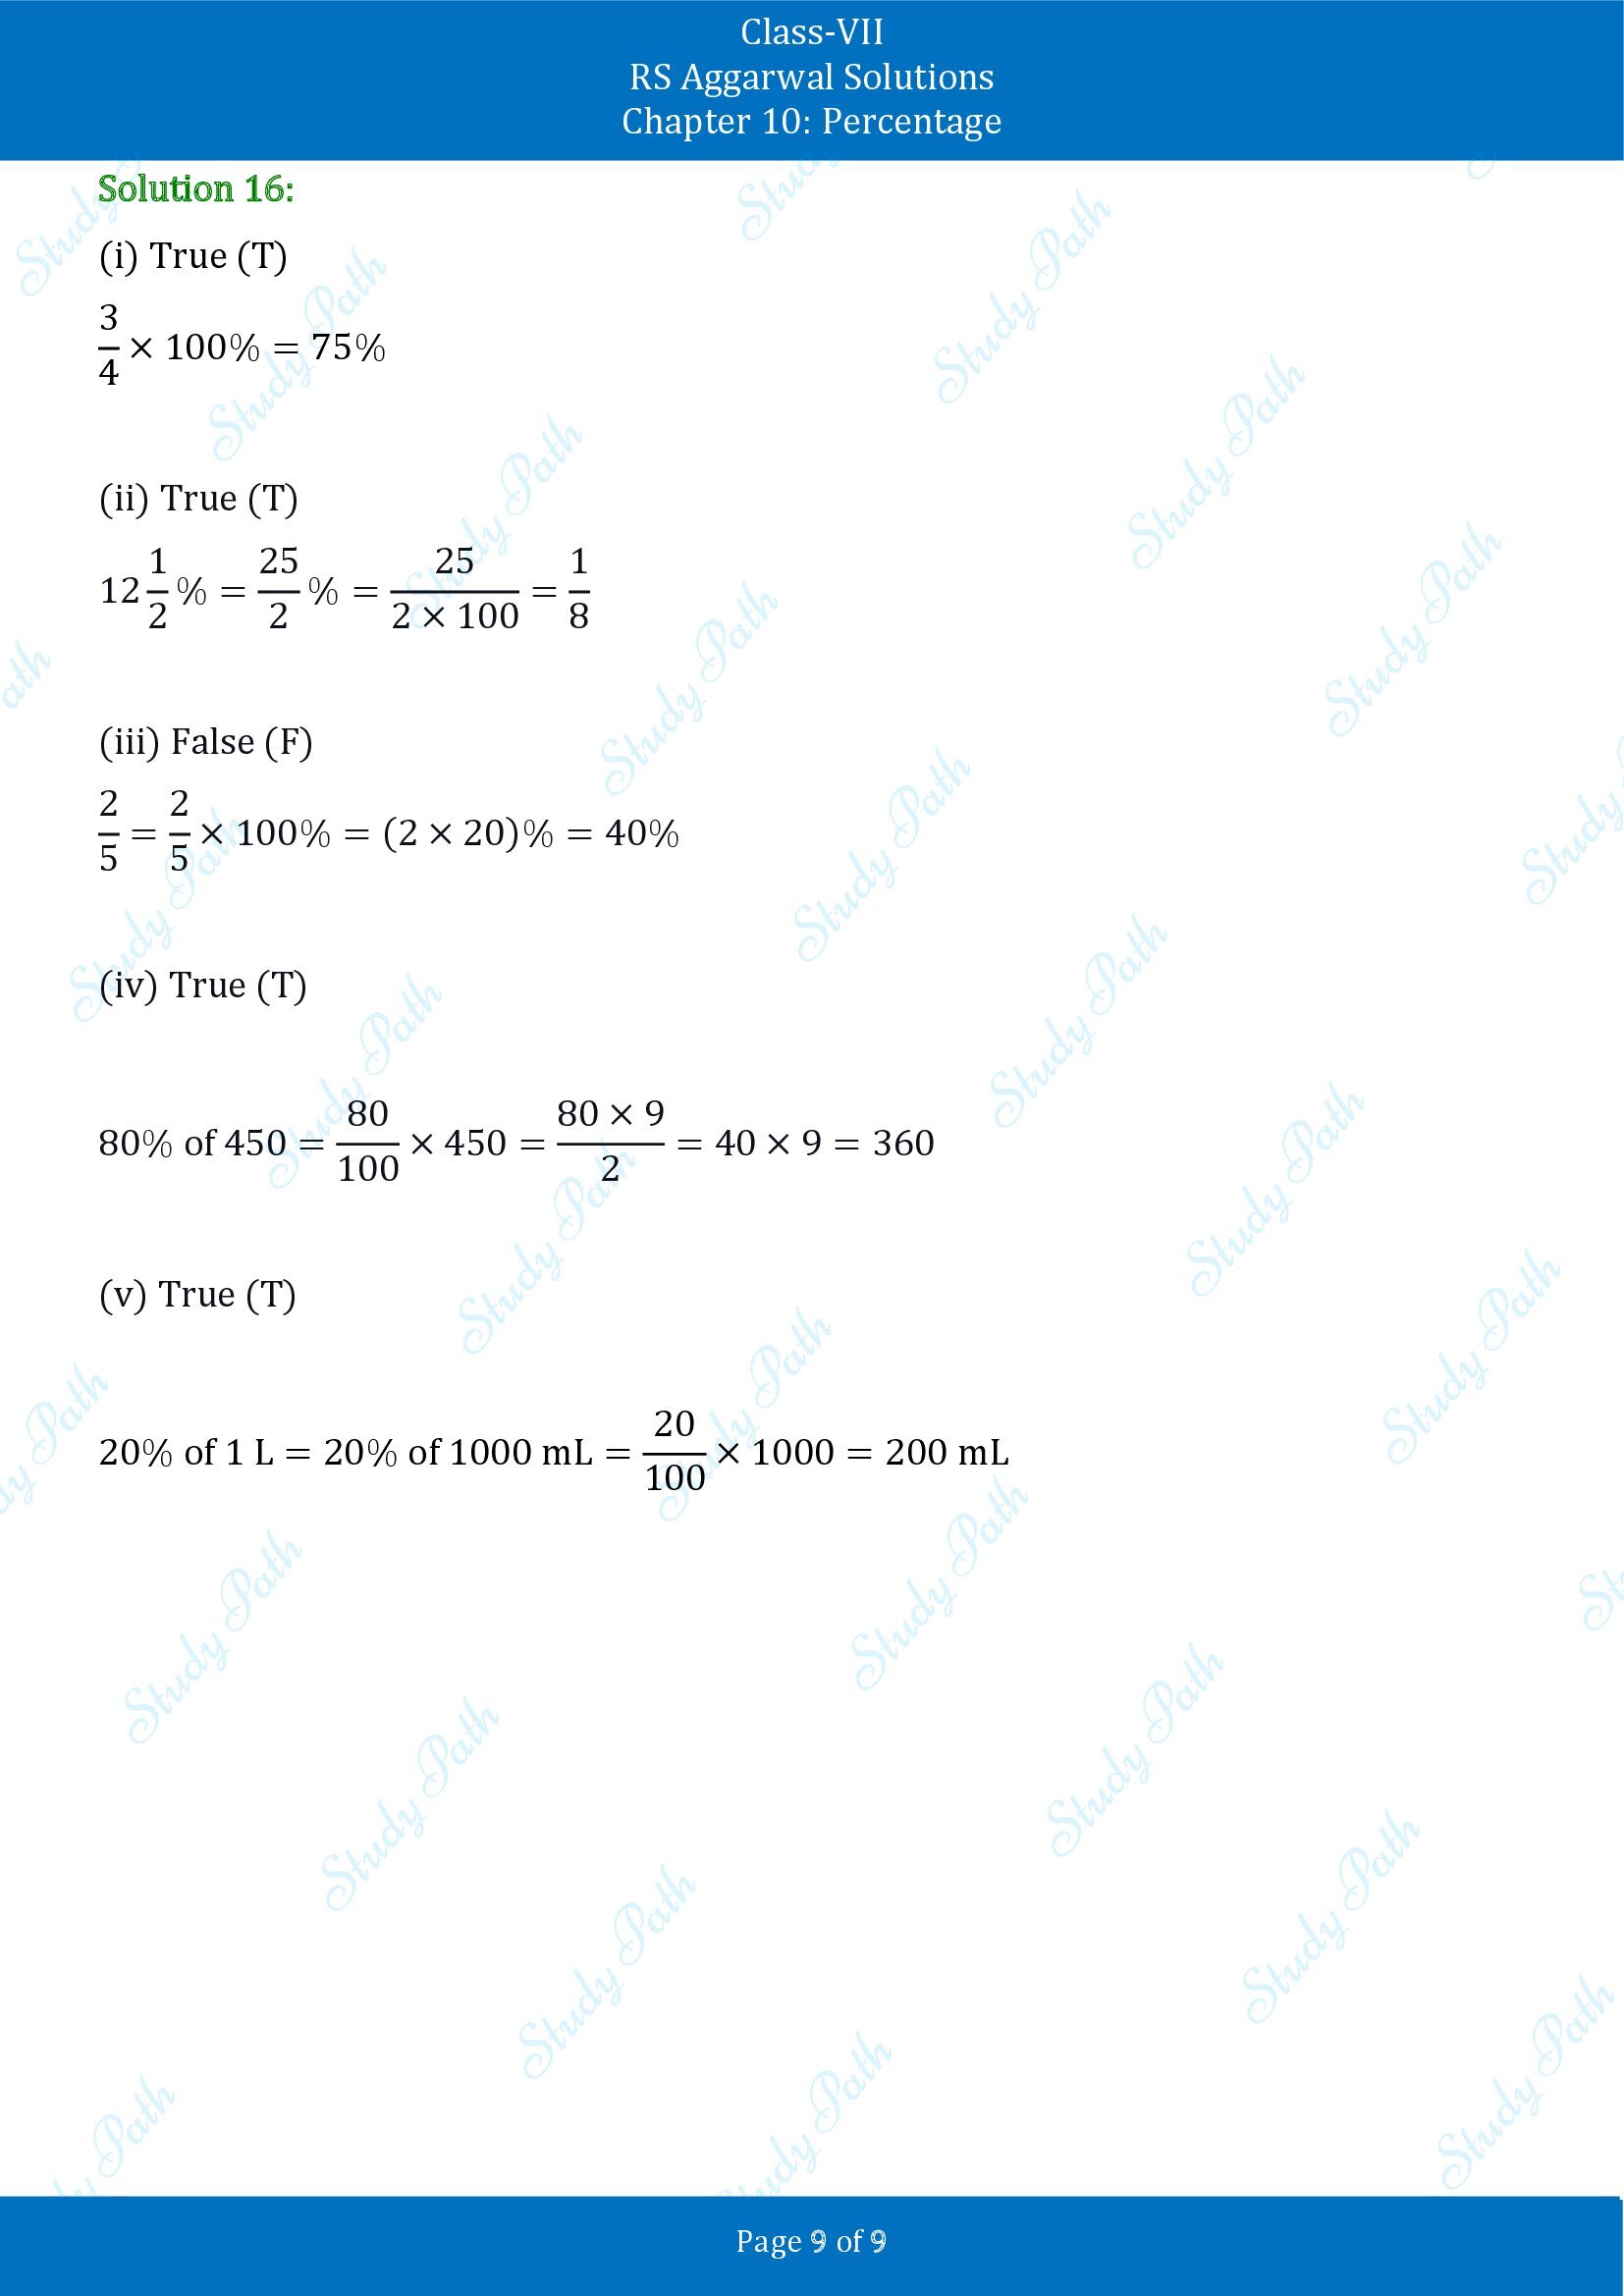 RS Aggarwal Solutions Class 7 Chapter 10 Percentage Test Paper 00009